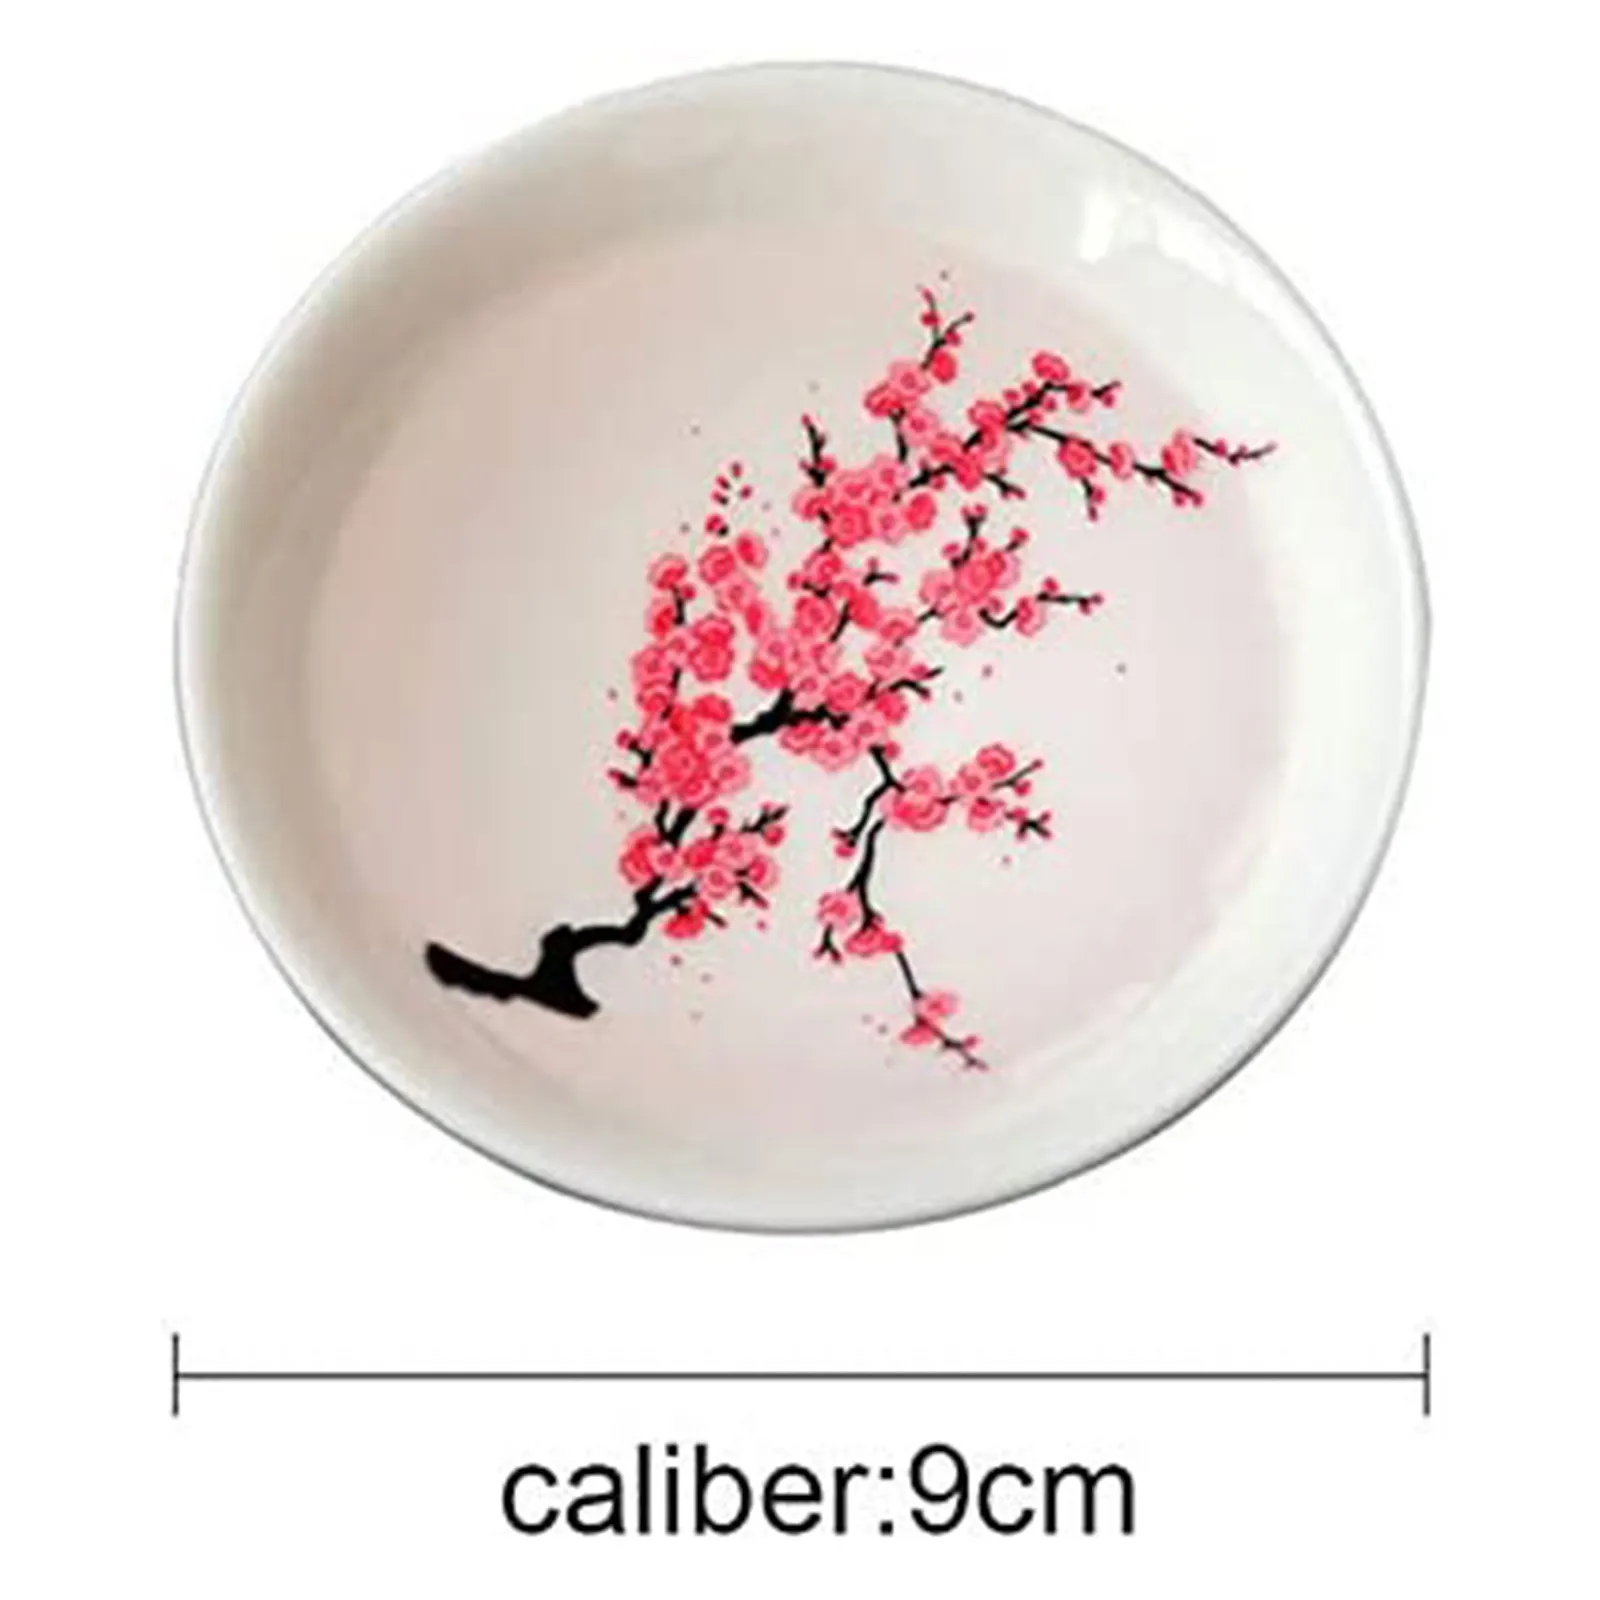 Plum Color Changing Ceramic Coffee Cup Bowl Holds 70ml,Peach Blossom WMTFCBE Cold&Hot Temperature Two-Way Color Changing Sakura Japanese Sake Cup Sakura Peach 